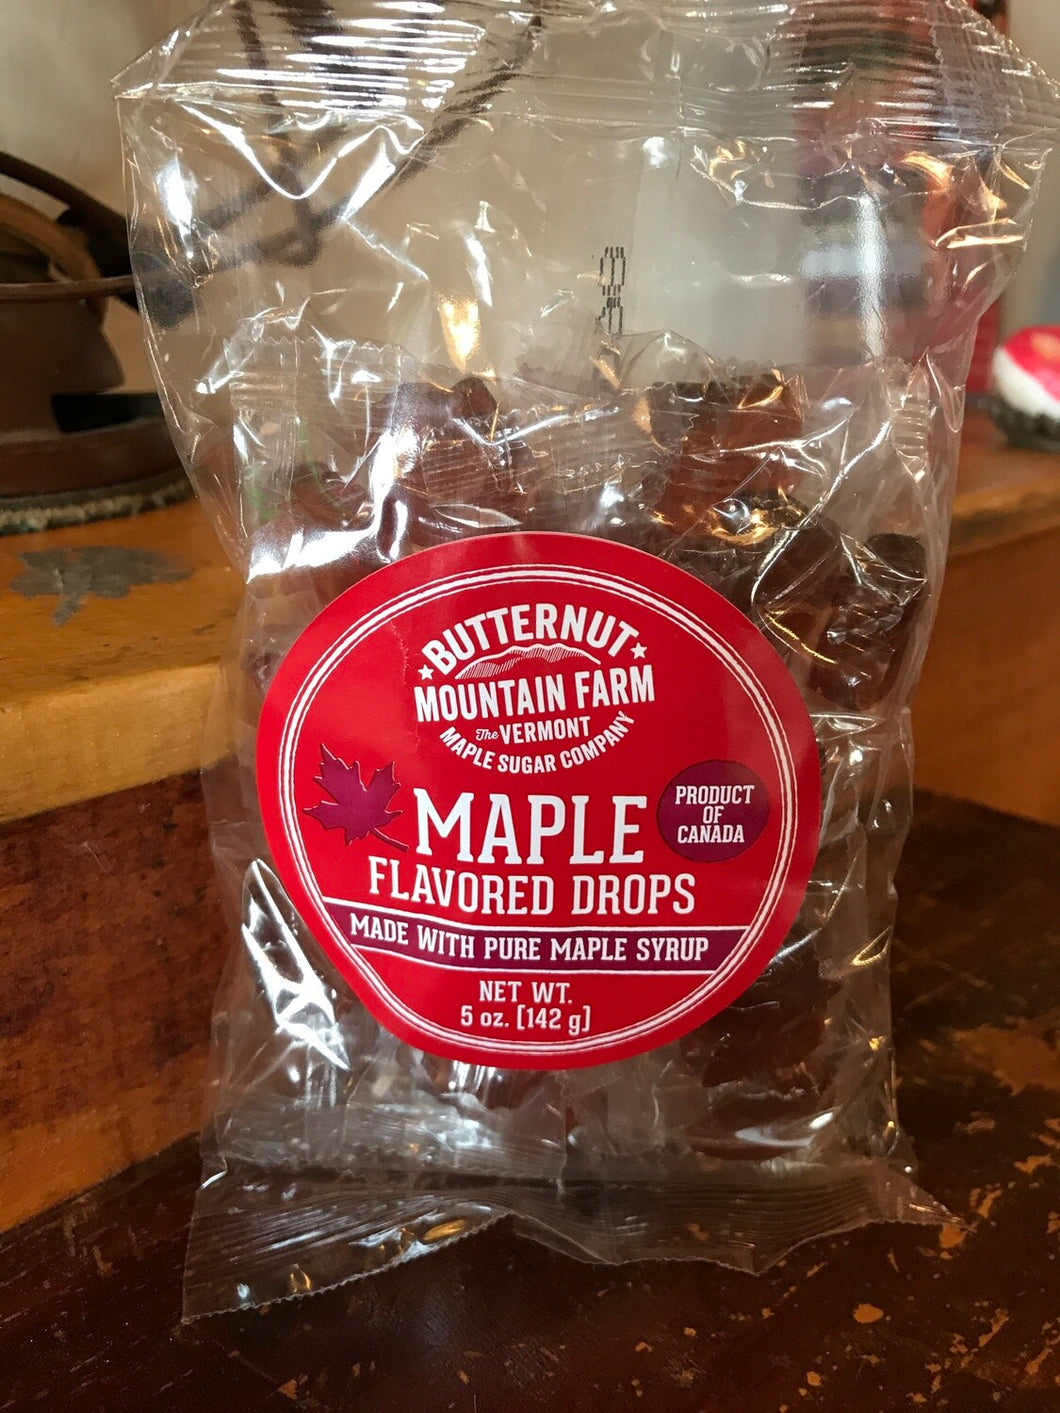 Maple flavored drops